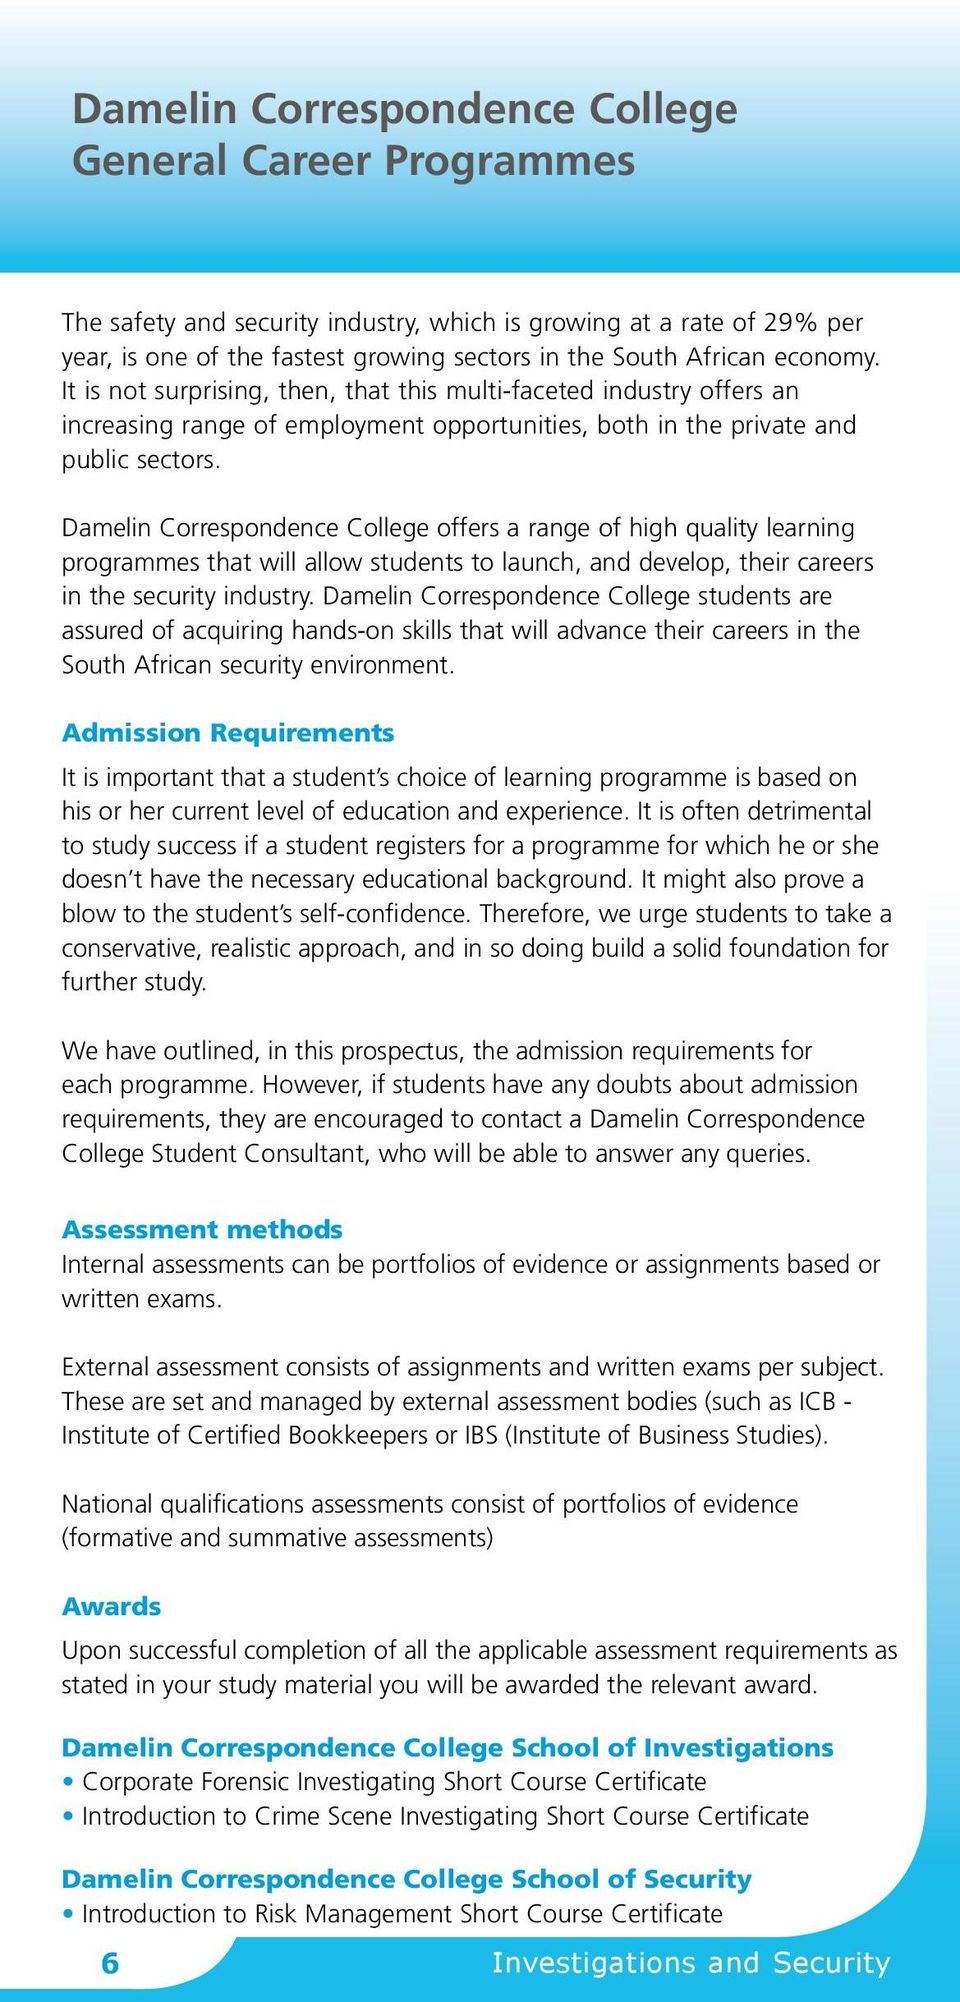 Damelin Correspondence College offers a range of high quality learning programmes that will allow students to launch, and develop, their careers in the security industry.